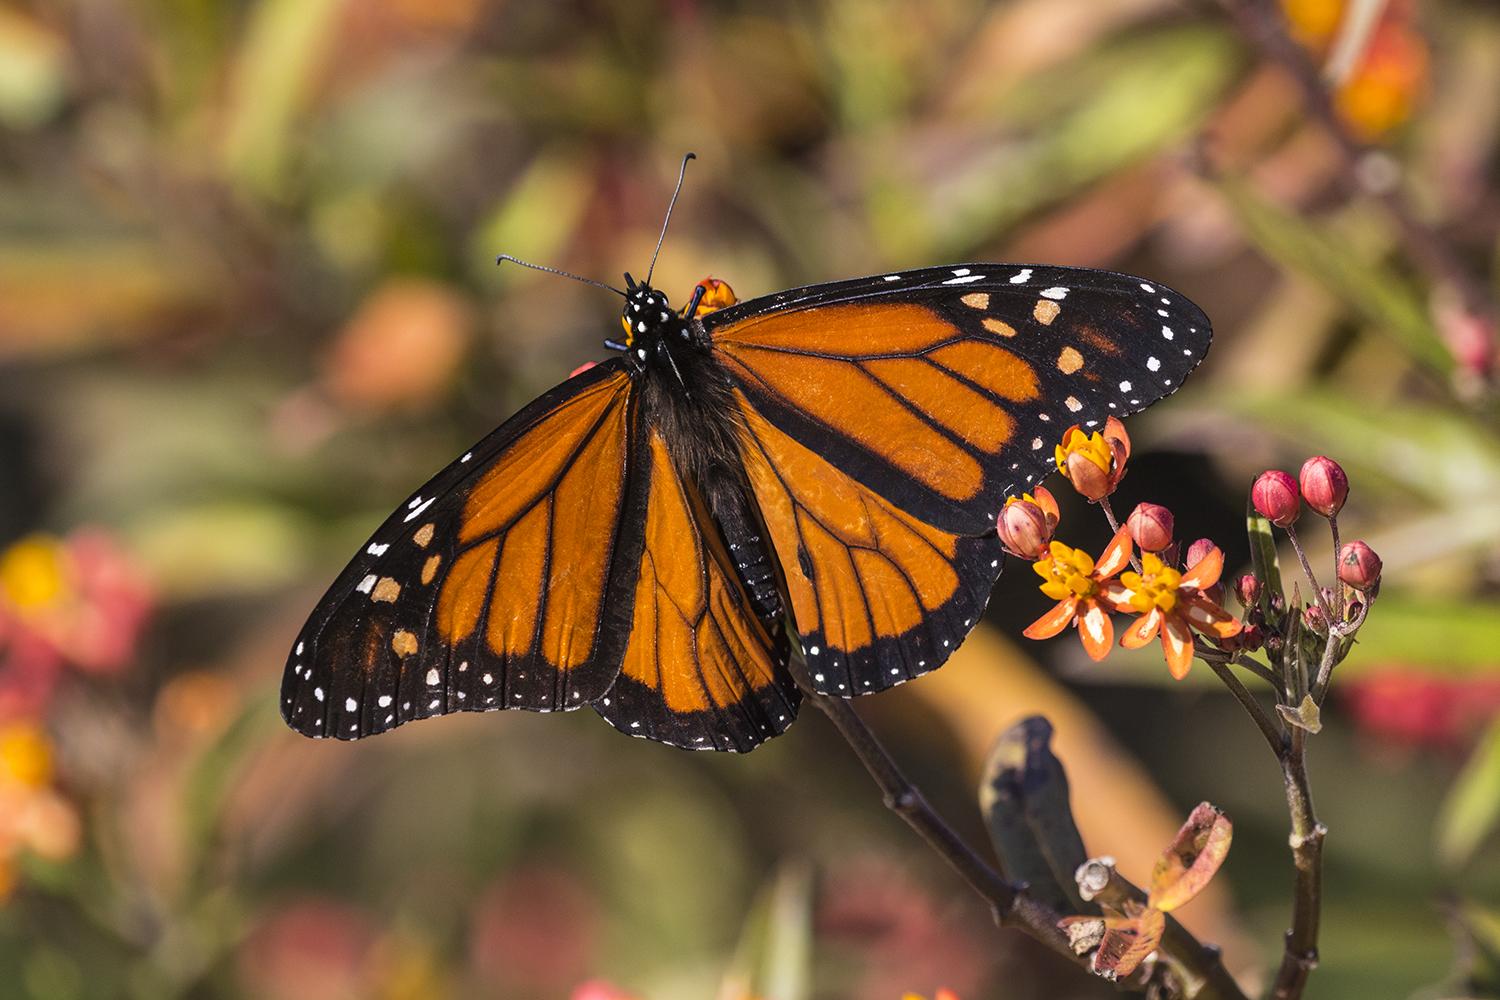 Monarch butterfly migration is coming to Texas